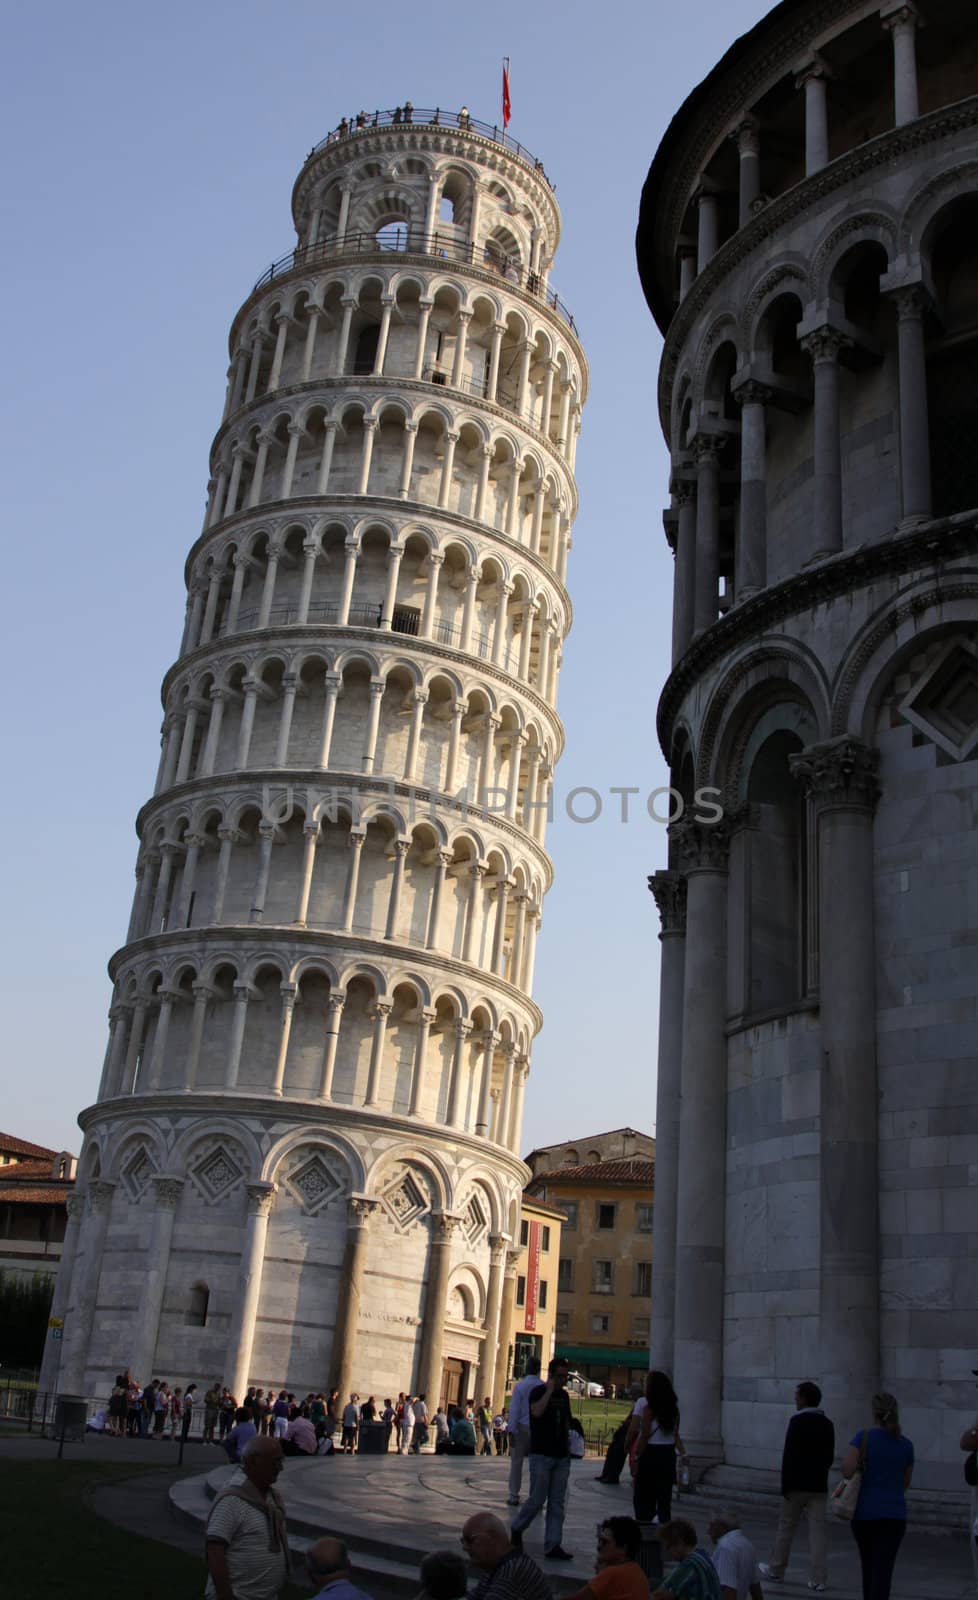 The leaning tower of Pisa in the Piazza del Duomo, in Pisa, Tuscany, Italy.
